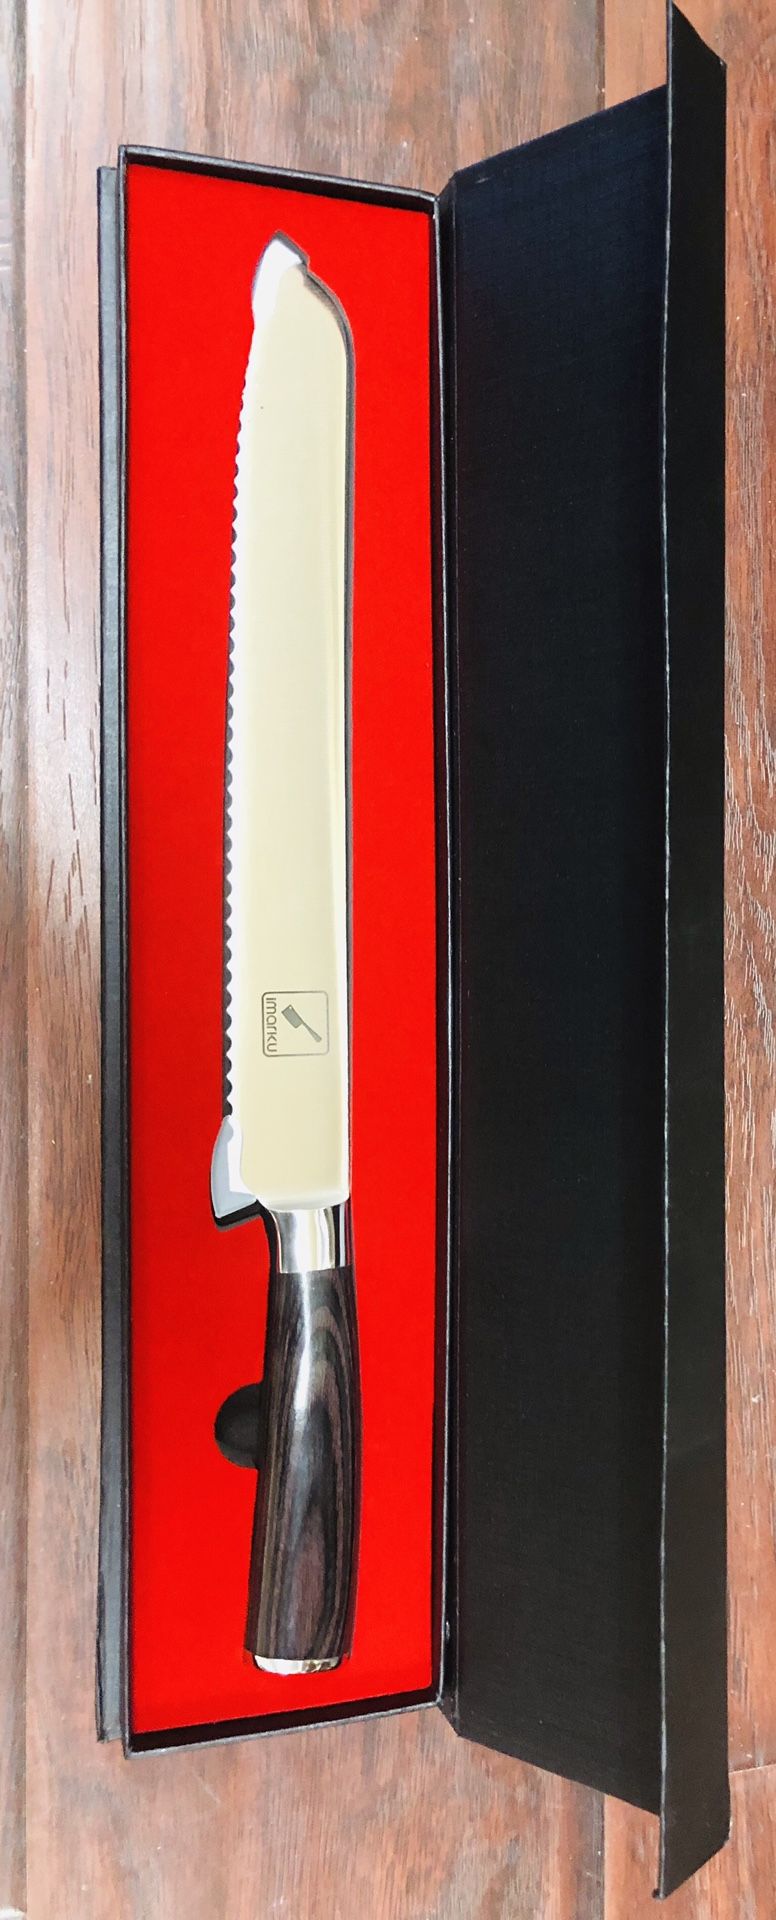 10” Imarku Pro serrated knife - High Carbon Stainless Steel Cake Knife - Brand New In the Box